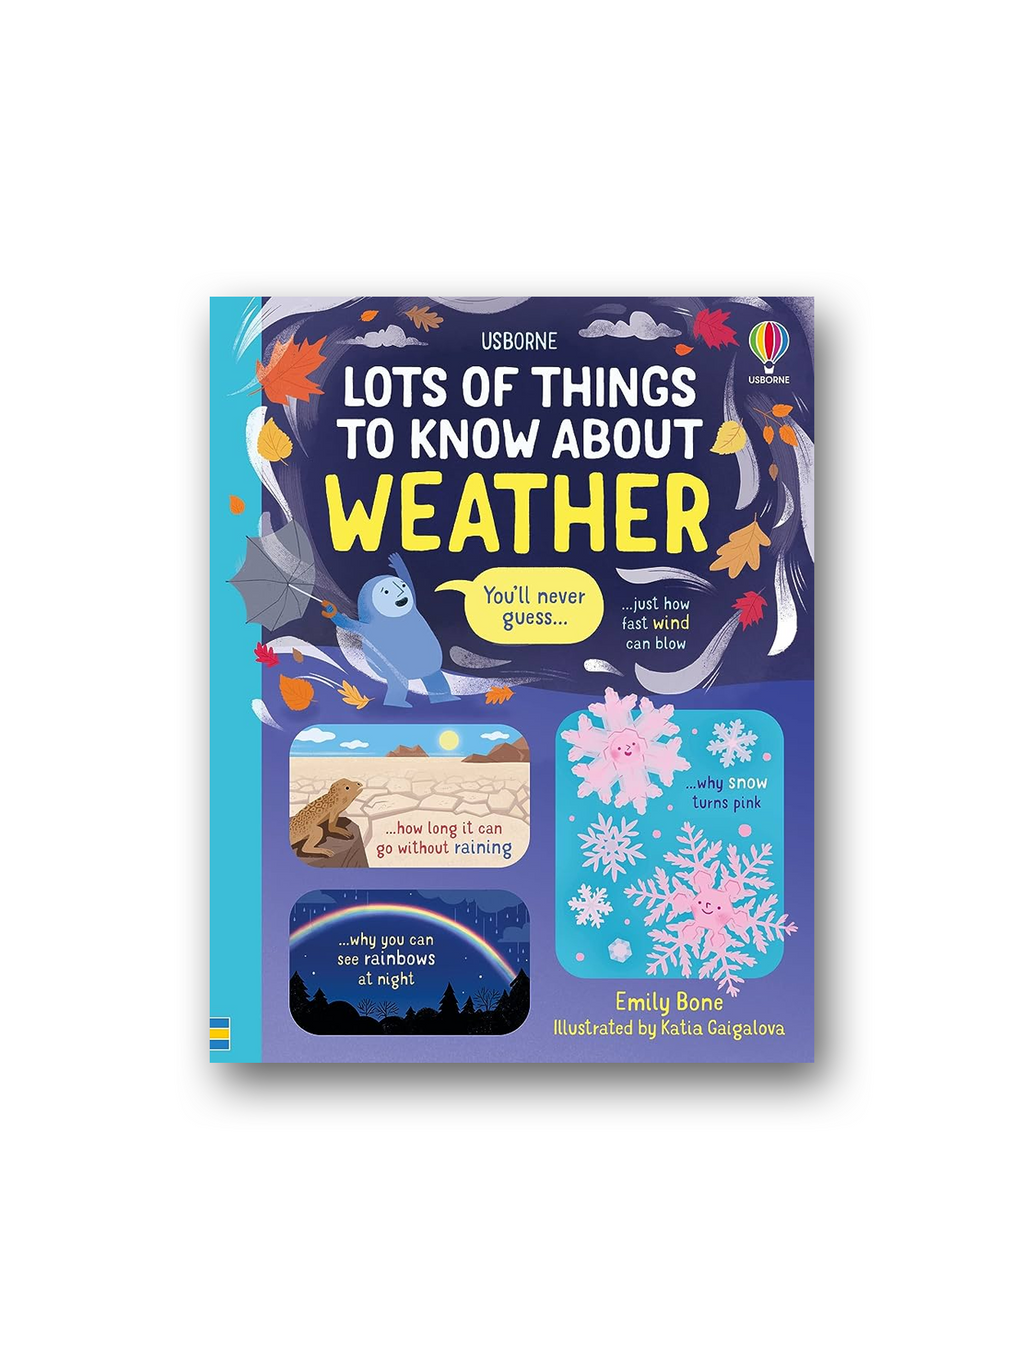 Lots of Things to Know About Weather